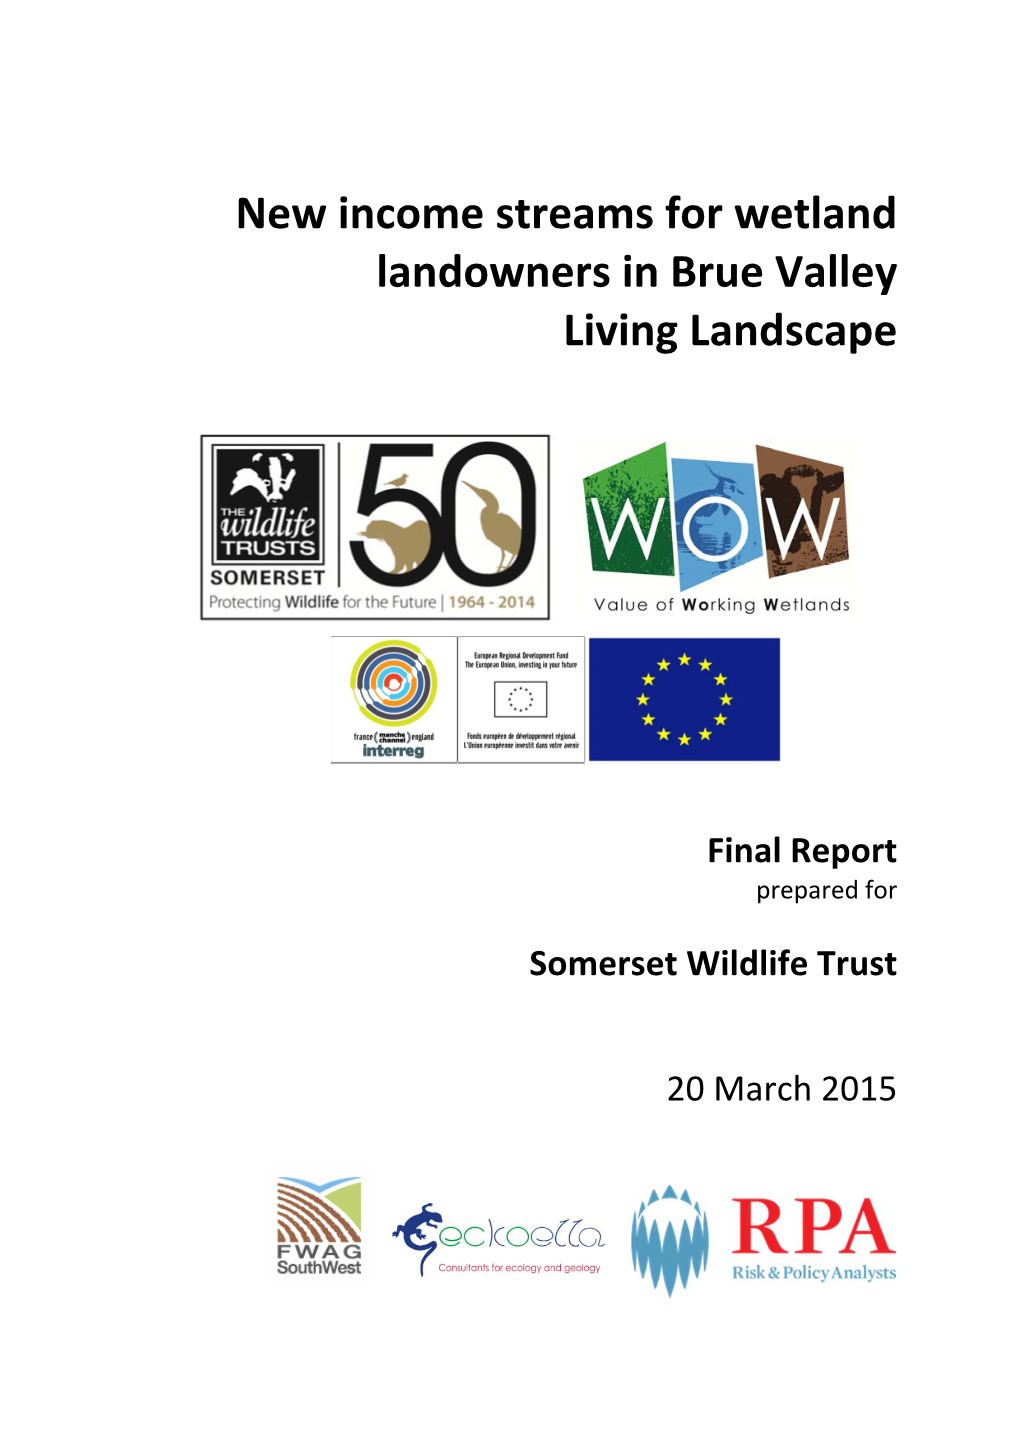 New Income Streams for Wetland Landowners in Brue Valley Living Landscape